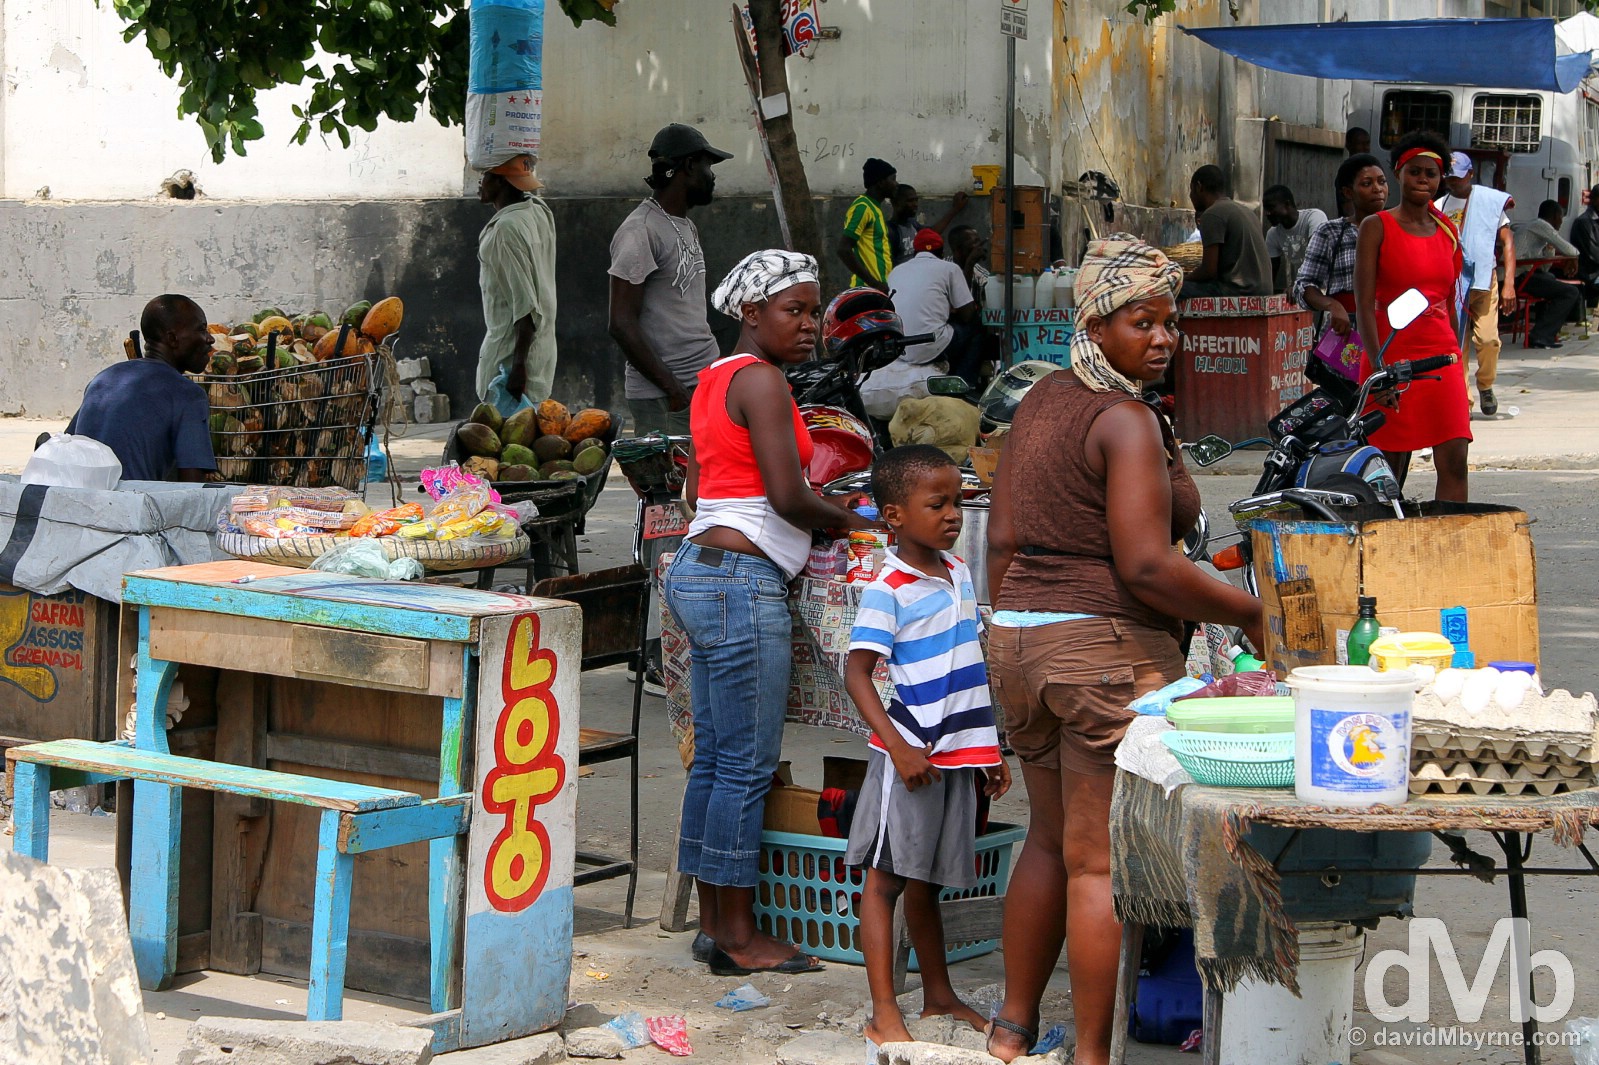 On the streets of Port-au-Prince, Haiti. May 17, 2015.